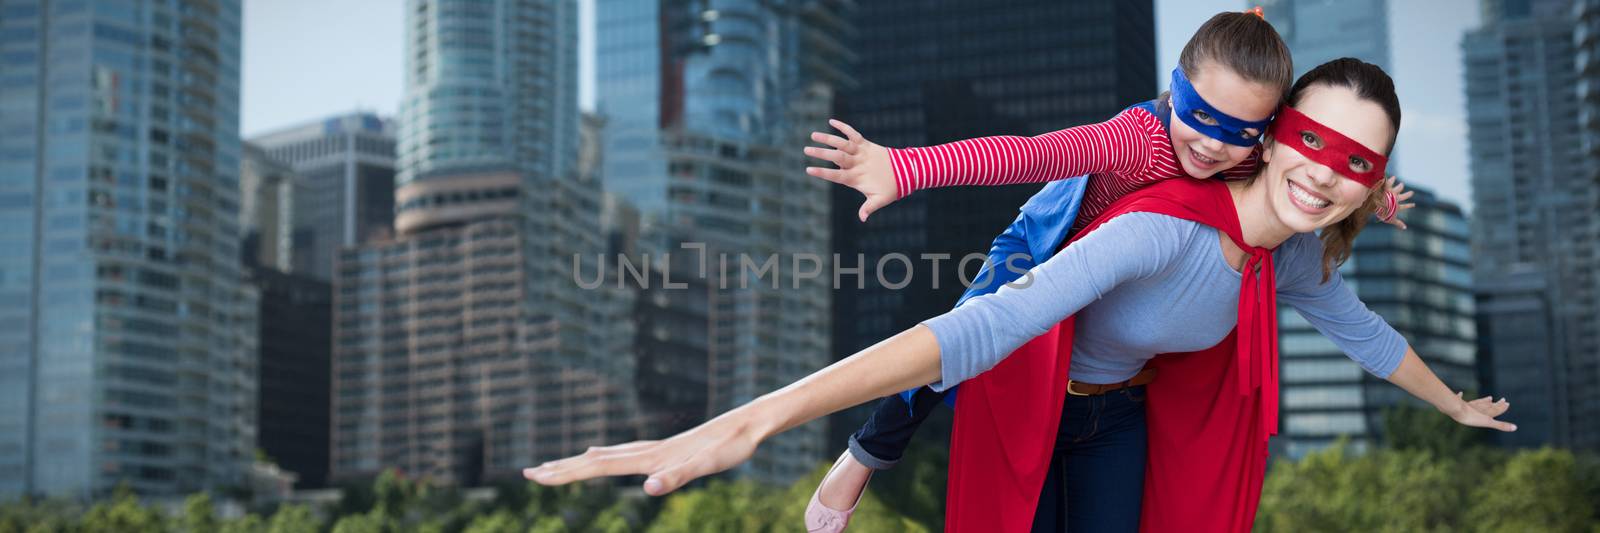 Composite image of mother and daughter pretending to be superhero by Wavebreakmedia